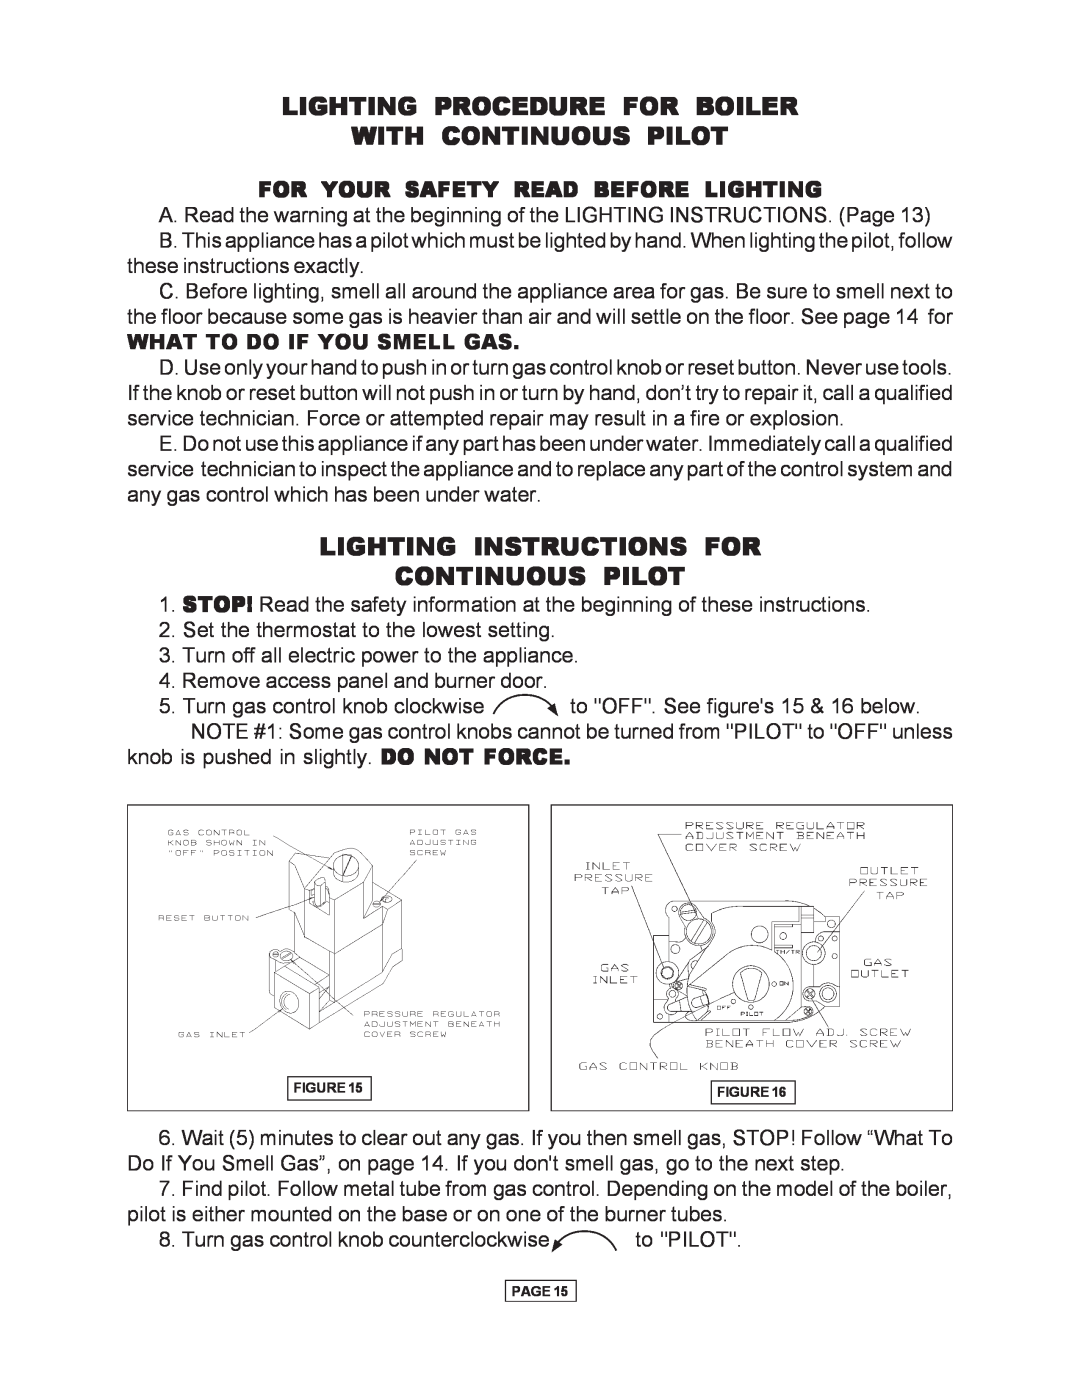 Utica Gas-fired Boiler Lighting Procedure For Boiler, With Continuous Pilot, Lighting Instructions For Continuous Pilot 